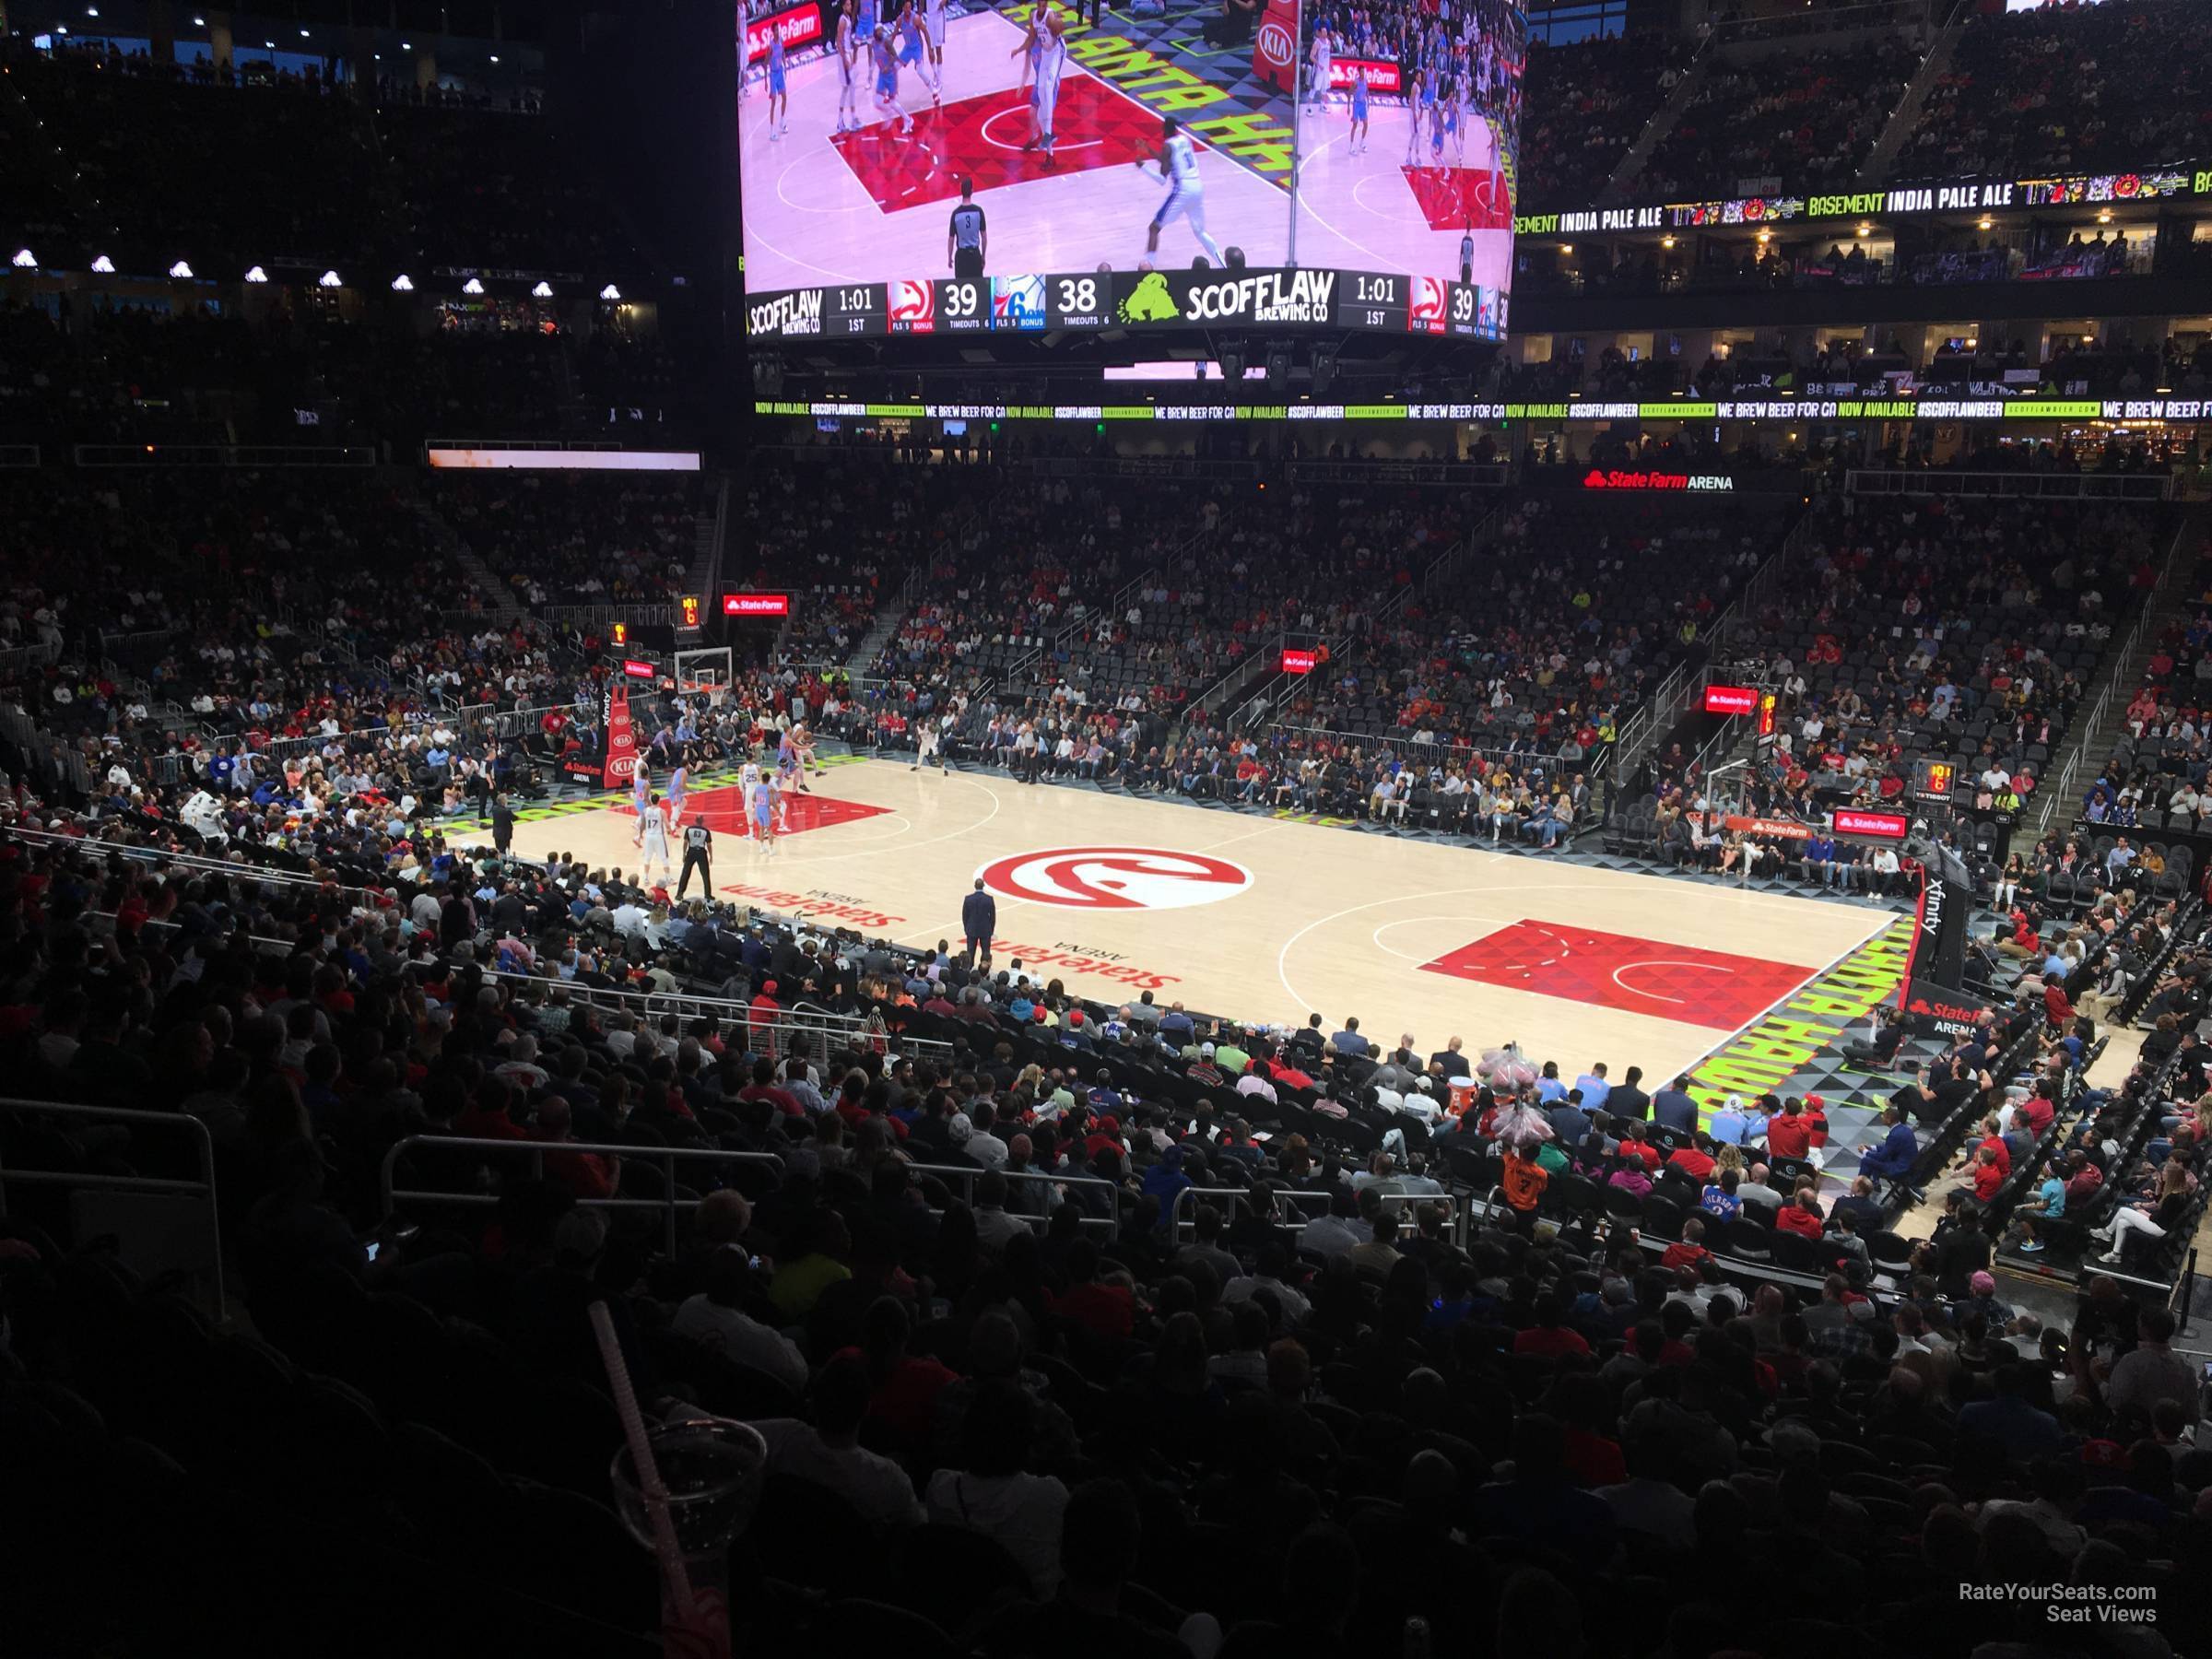 section 117, row x seat view  for basketball - state farm arena